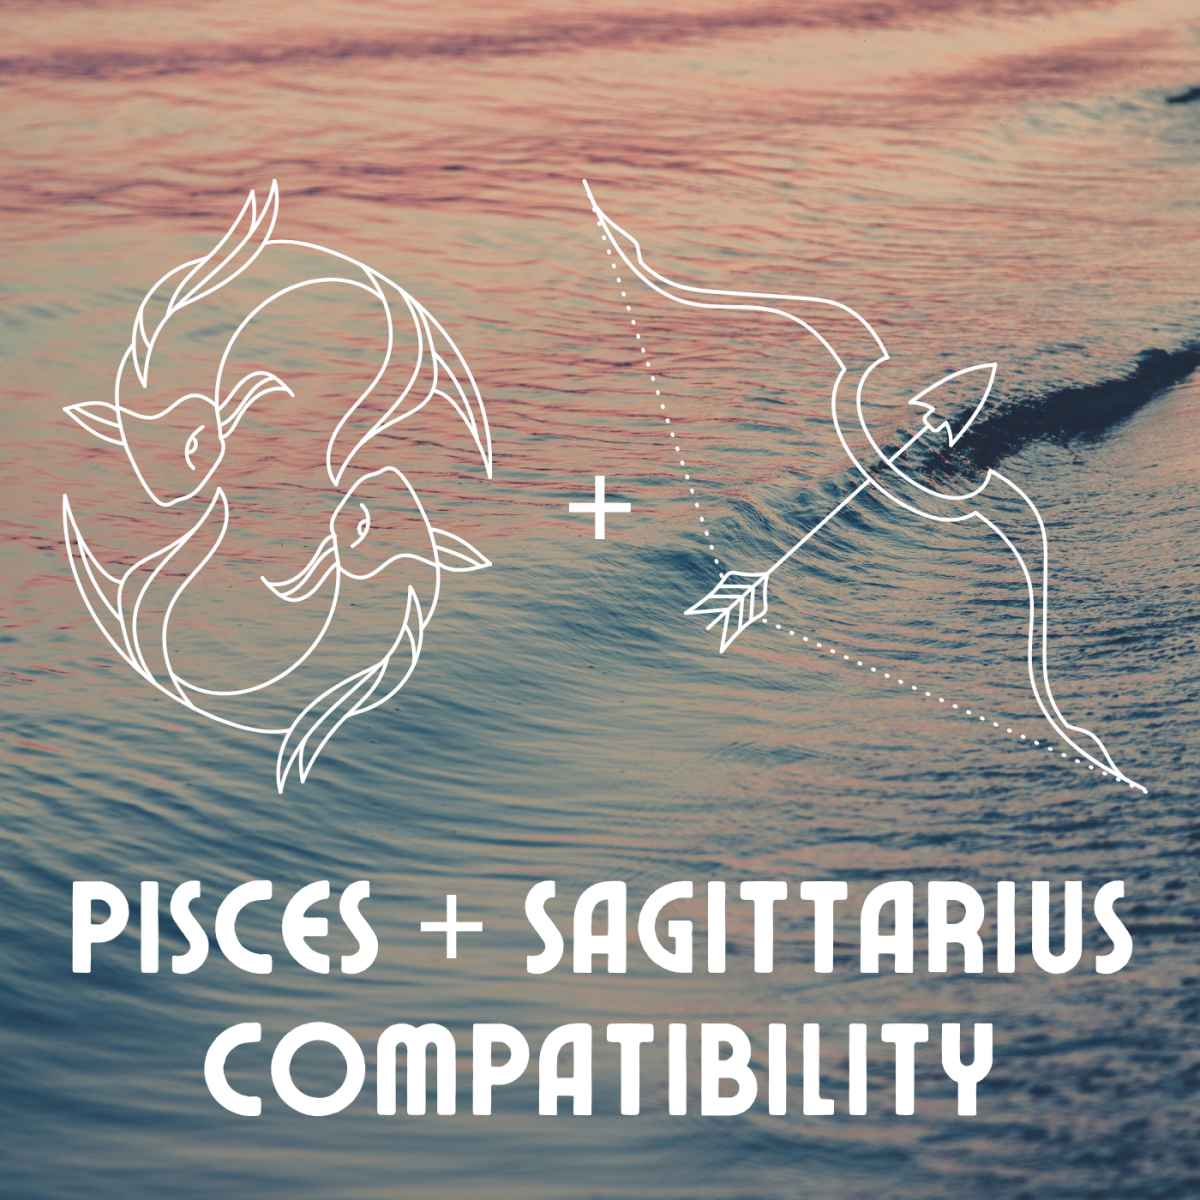 Check the astrocompatibility of the fish and the archer or centaur.